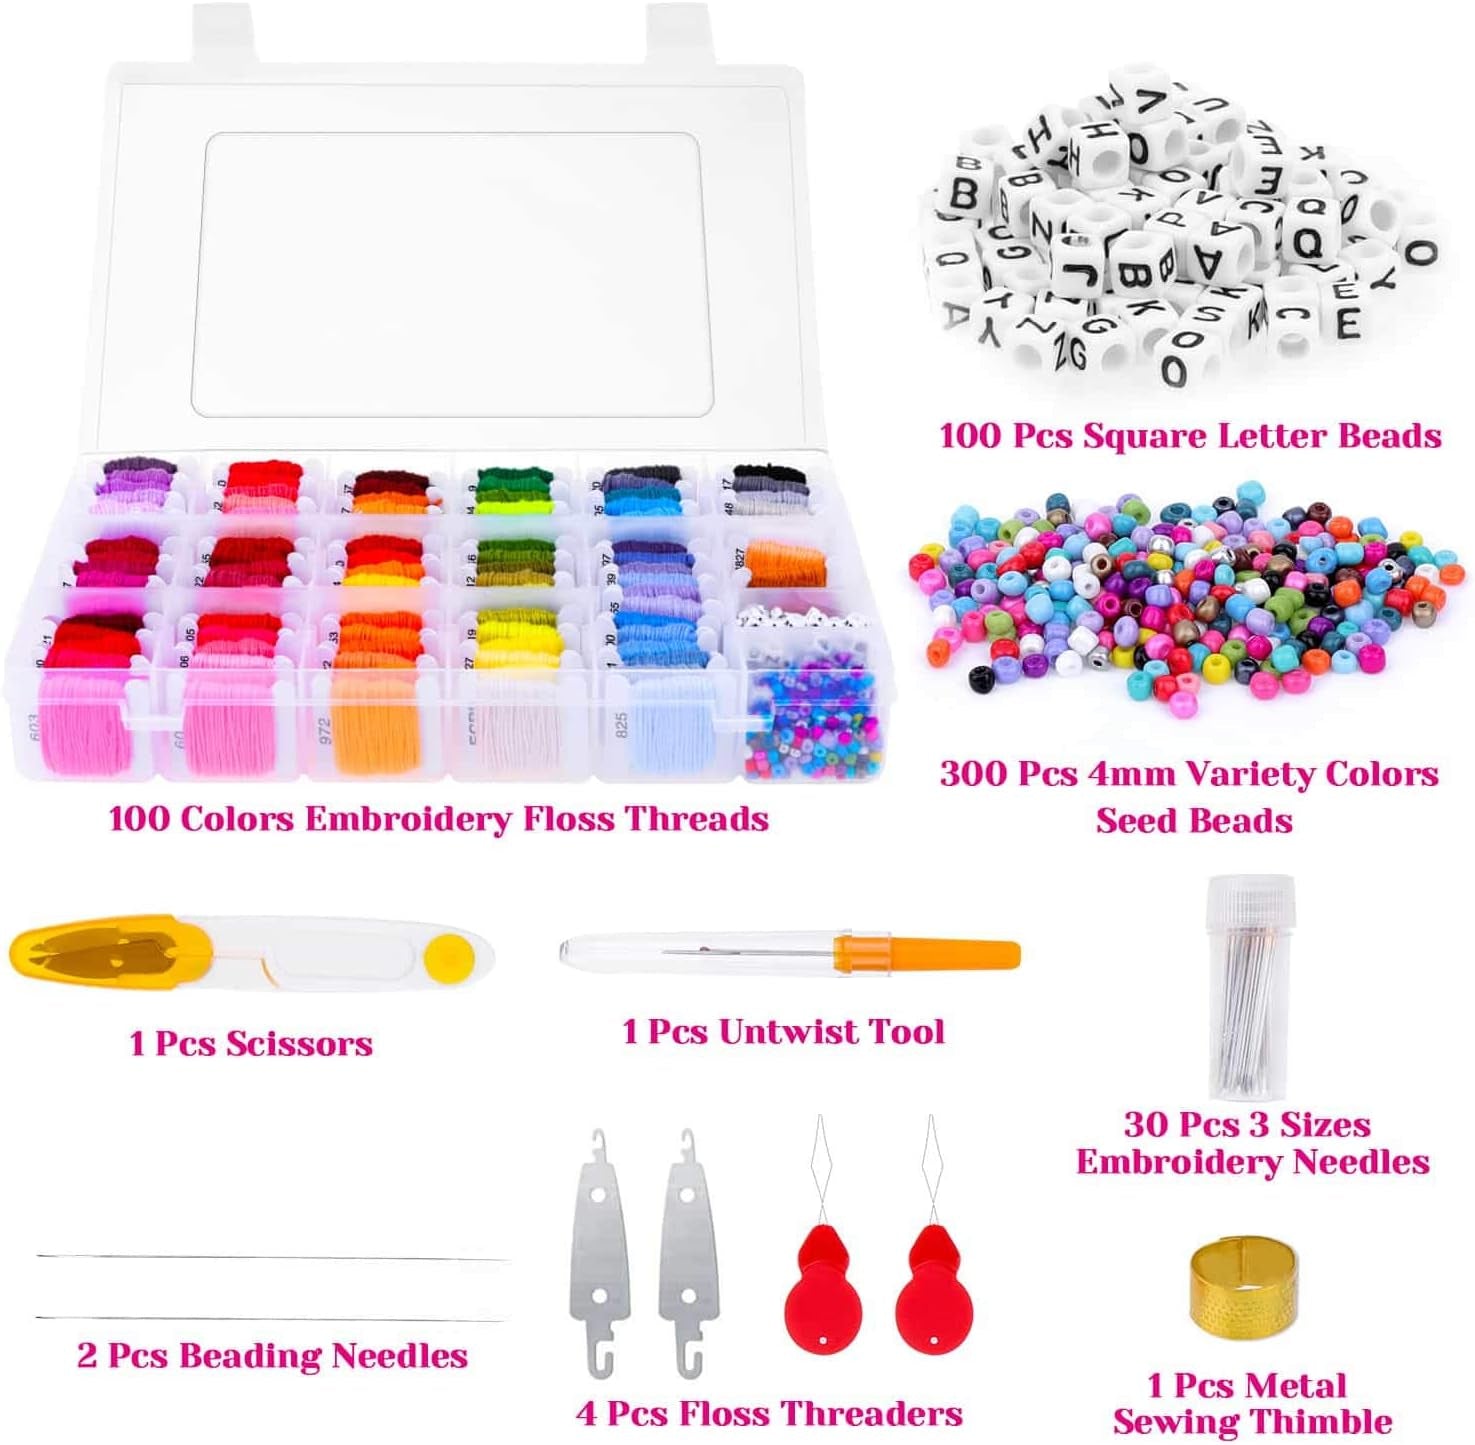 Friendship Bracelet String Kit, 100 Colors Embroidery Floss Cross Stitch Thread Supplies Kit with Organizer Storage Box, 39 Pcs Tools and 400 Beads for Embroidery Bracelet